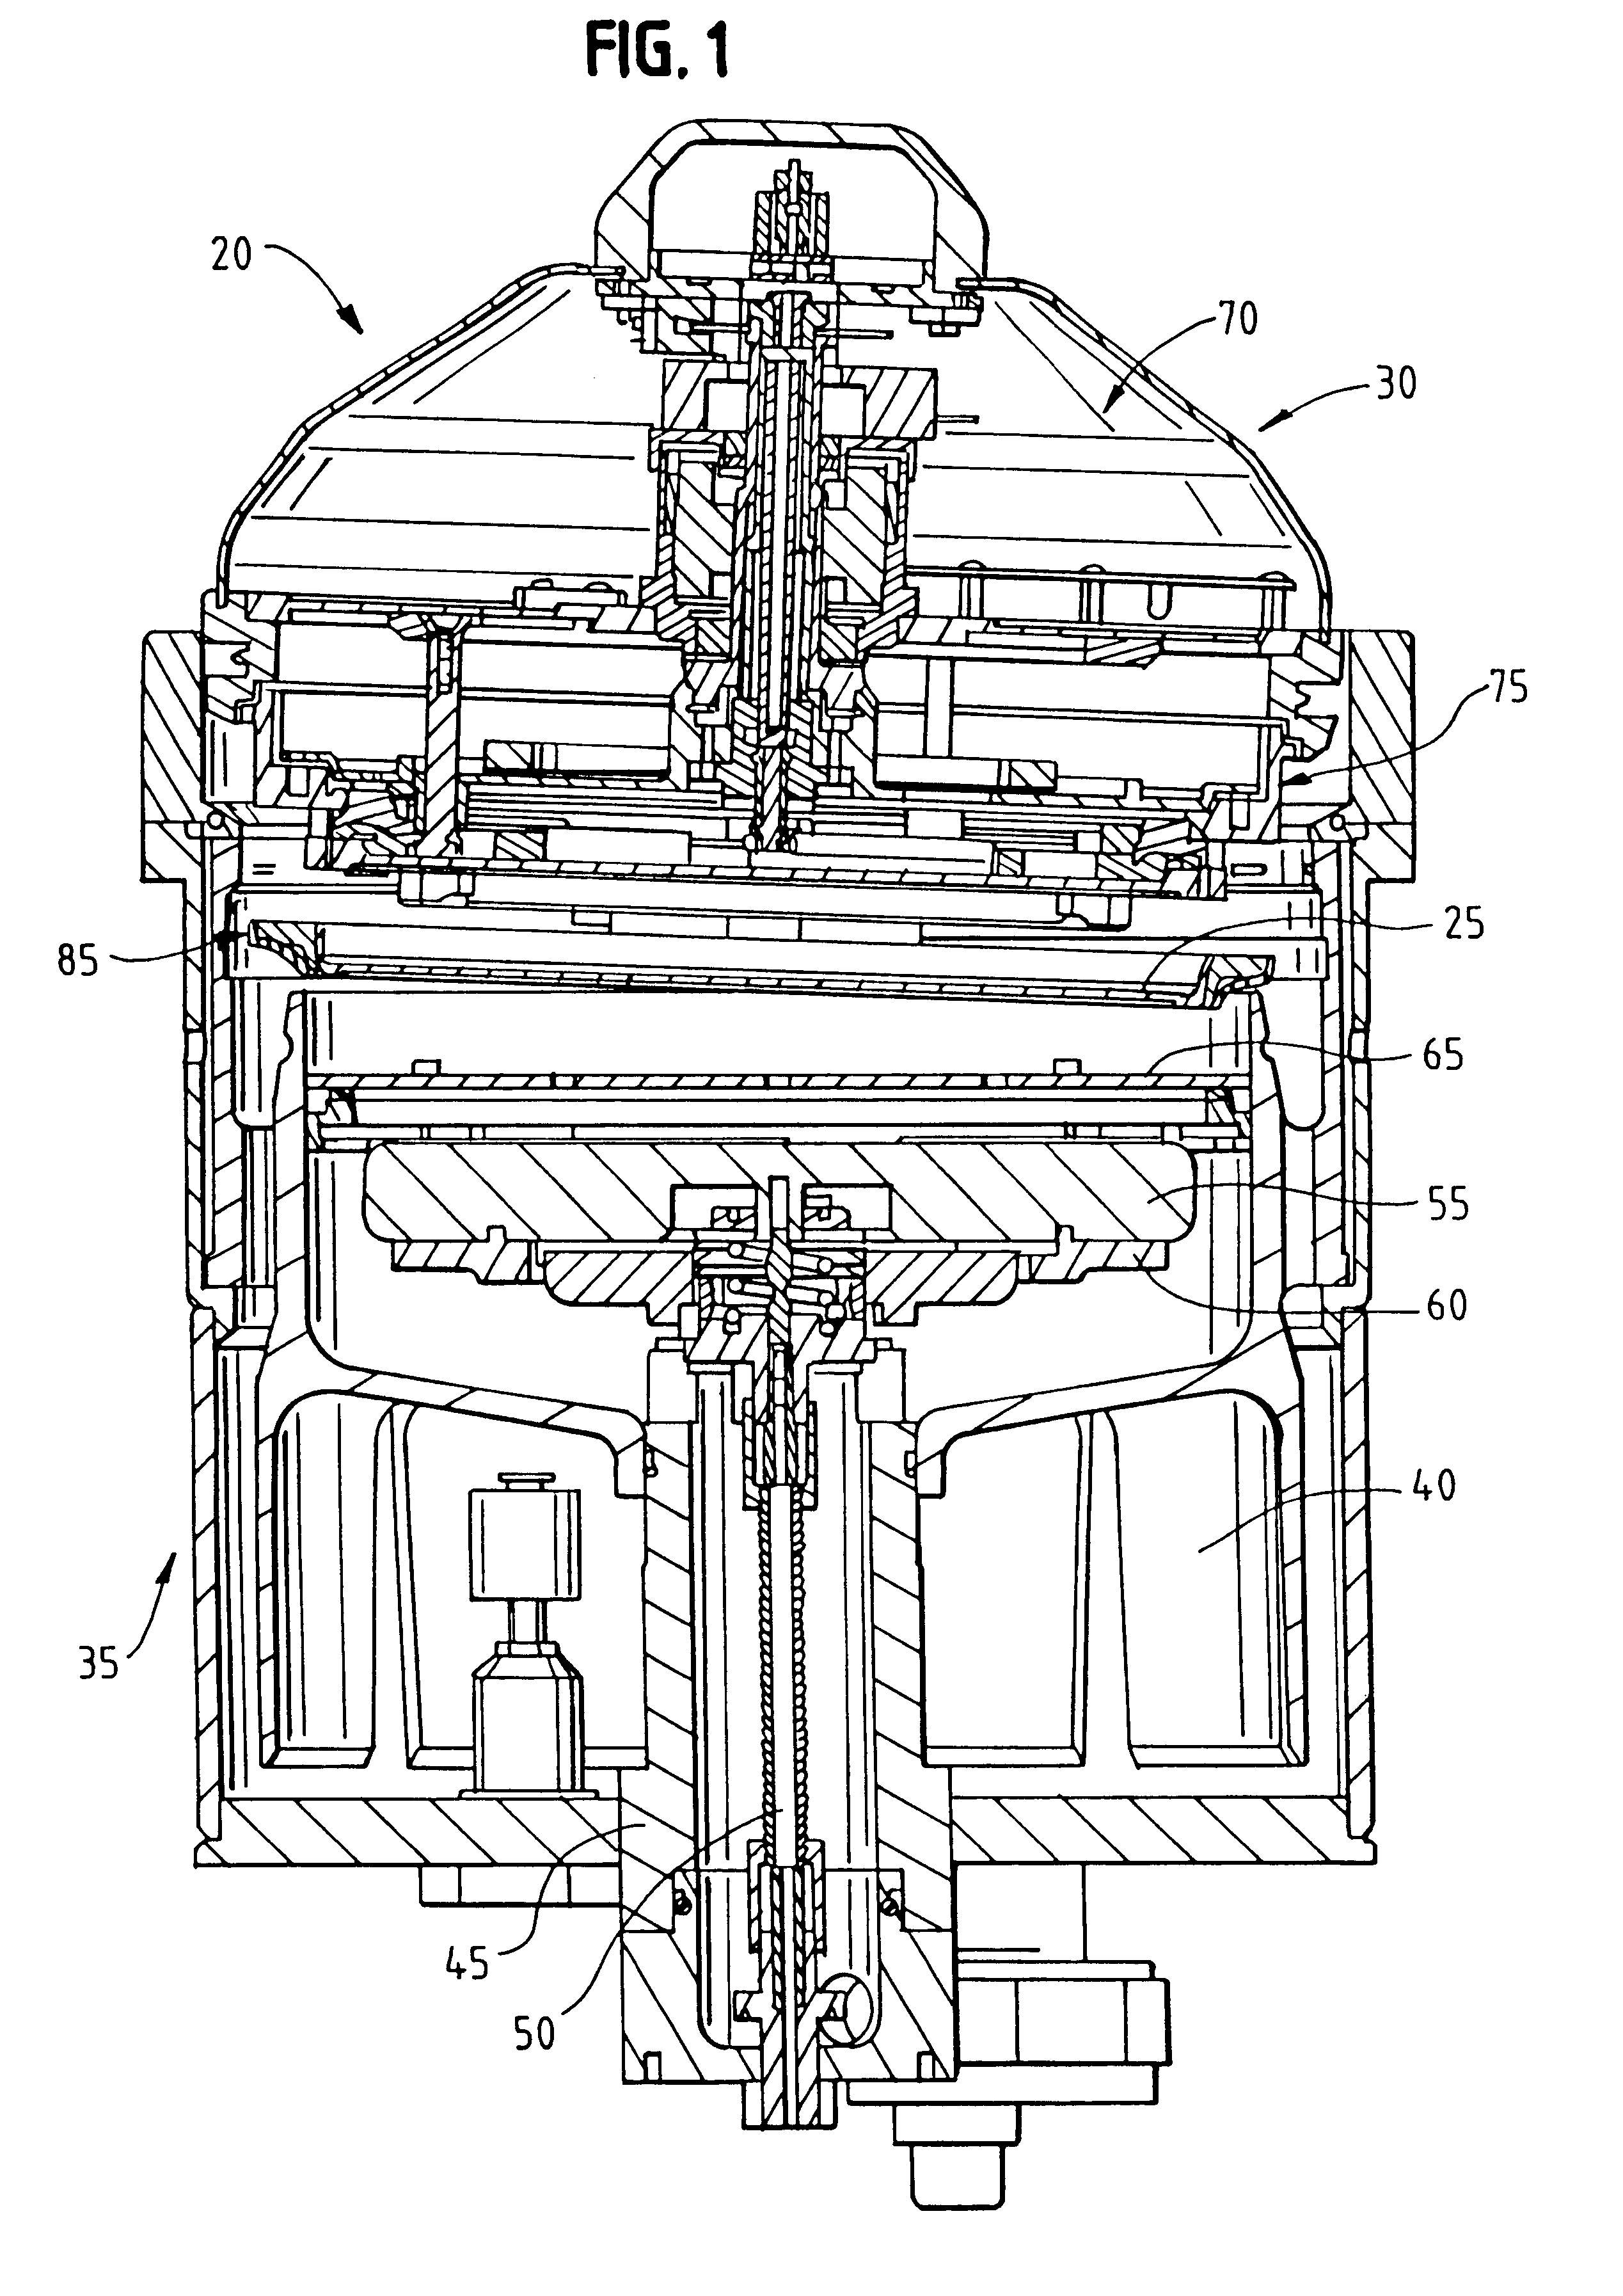 Aparatus for processing the surface of a microelectronic workpiece